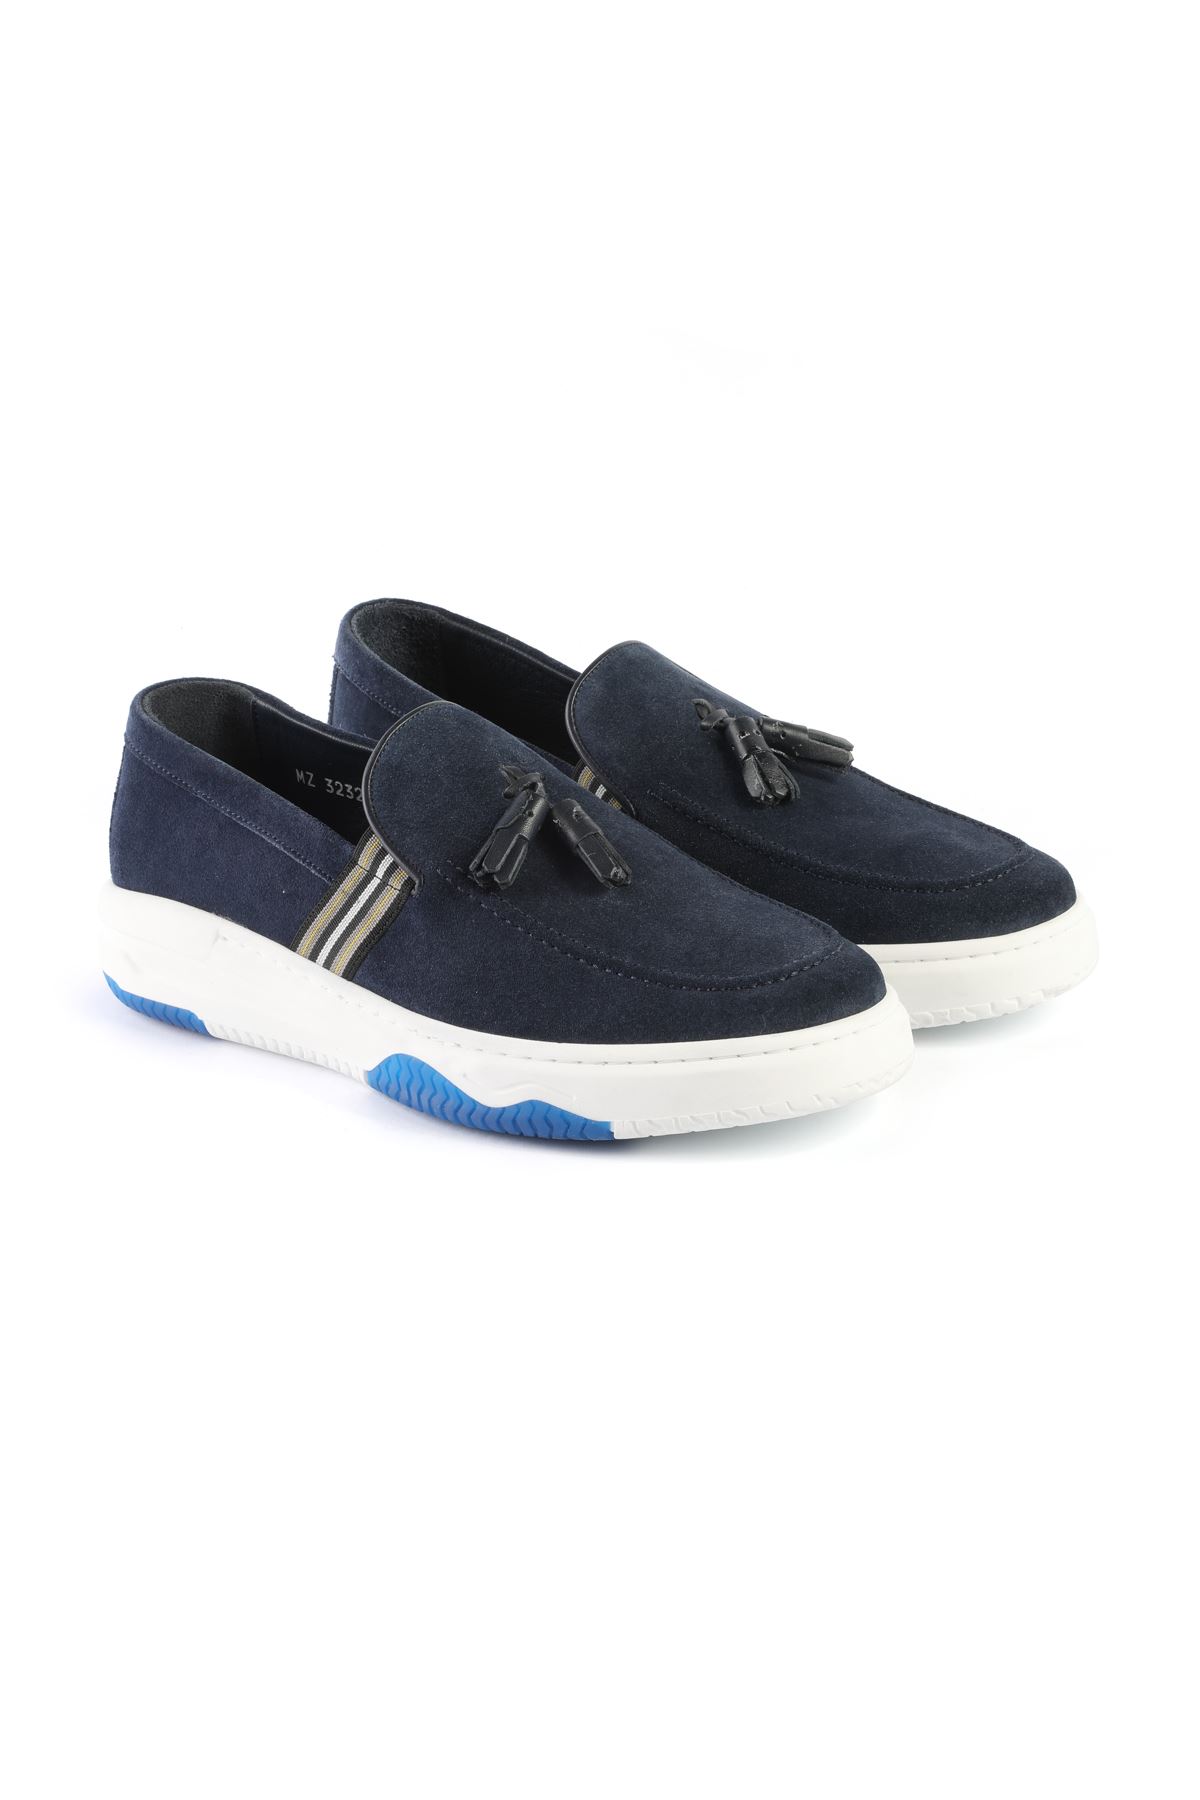 Libero L3232 Navy Blue Loafer Shoes